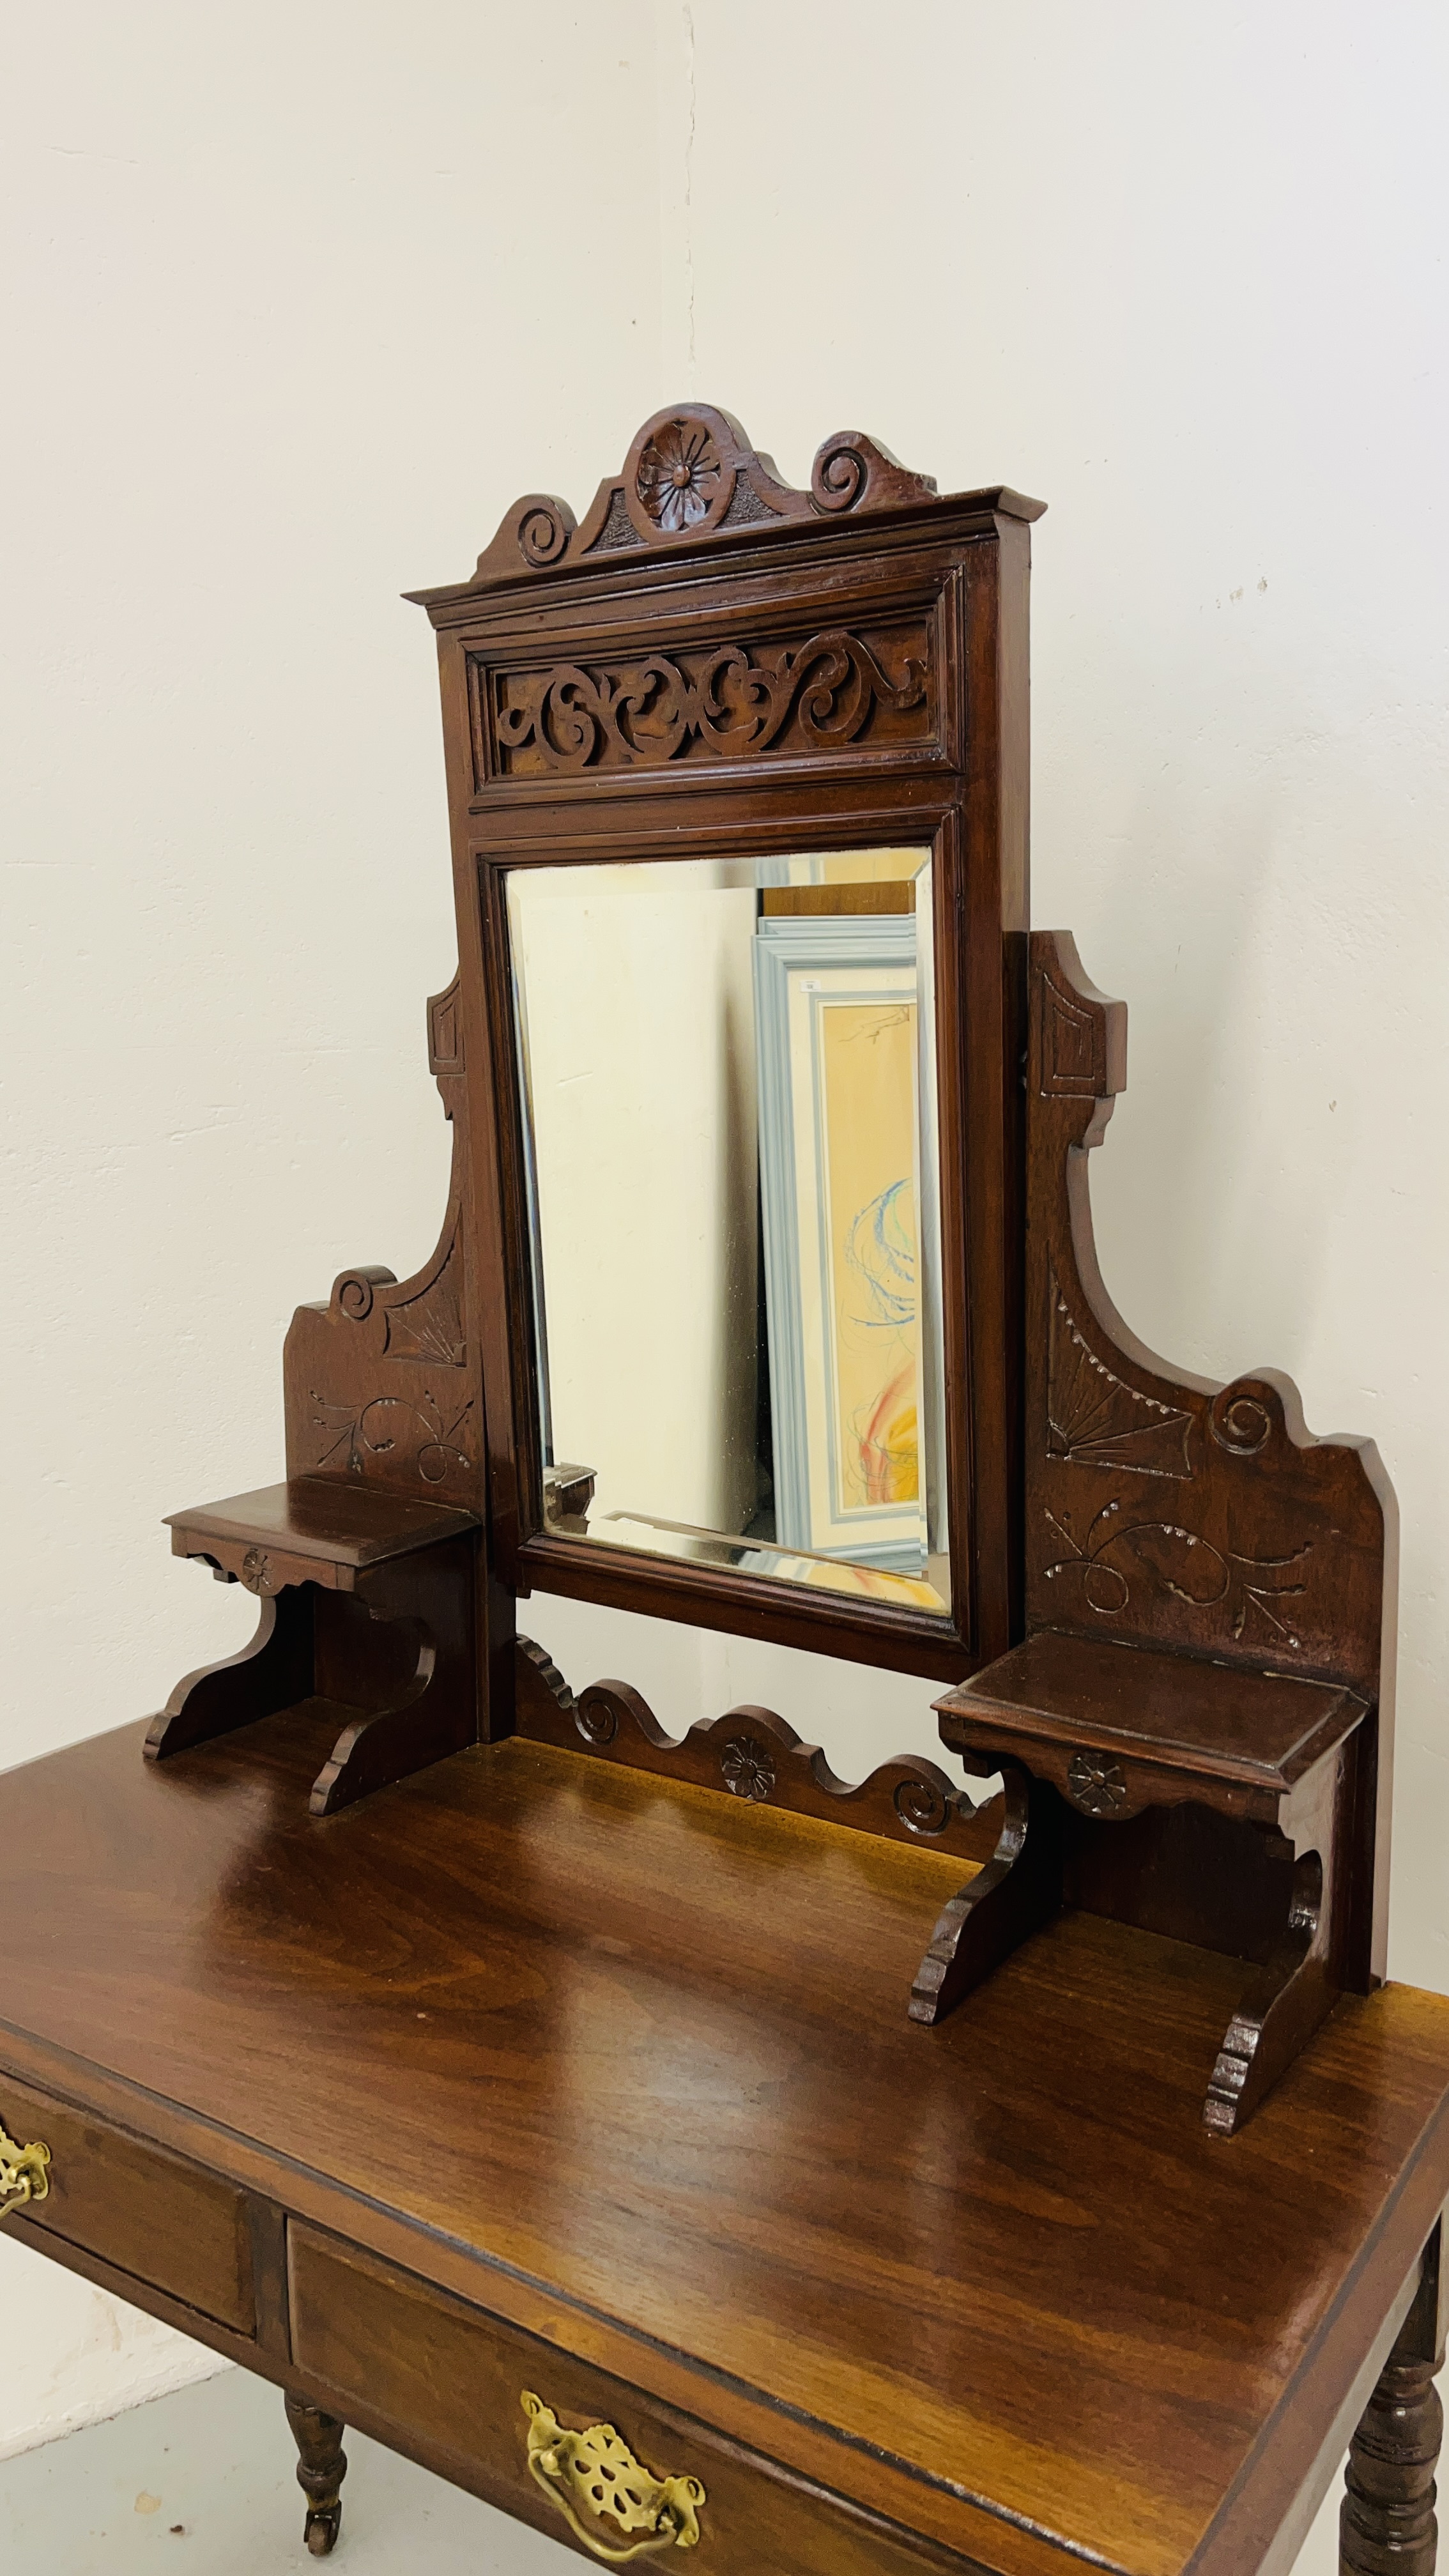 EDWARDIAN MAHOGANY TWO DRAWER DRESSING TABLE, CENTRAL MIRROR ON TURNED LEGS WIDTH 91CM. DEPTH 43CM. - Image 2 of 7